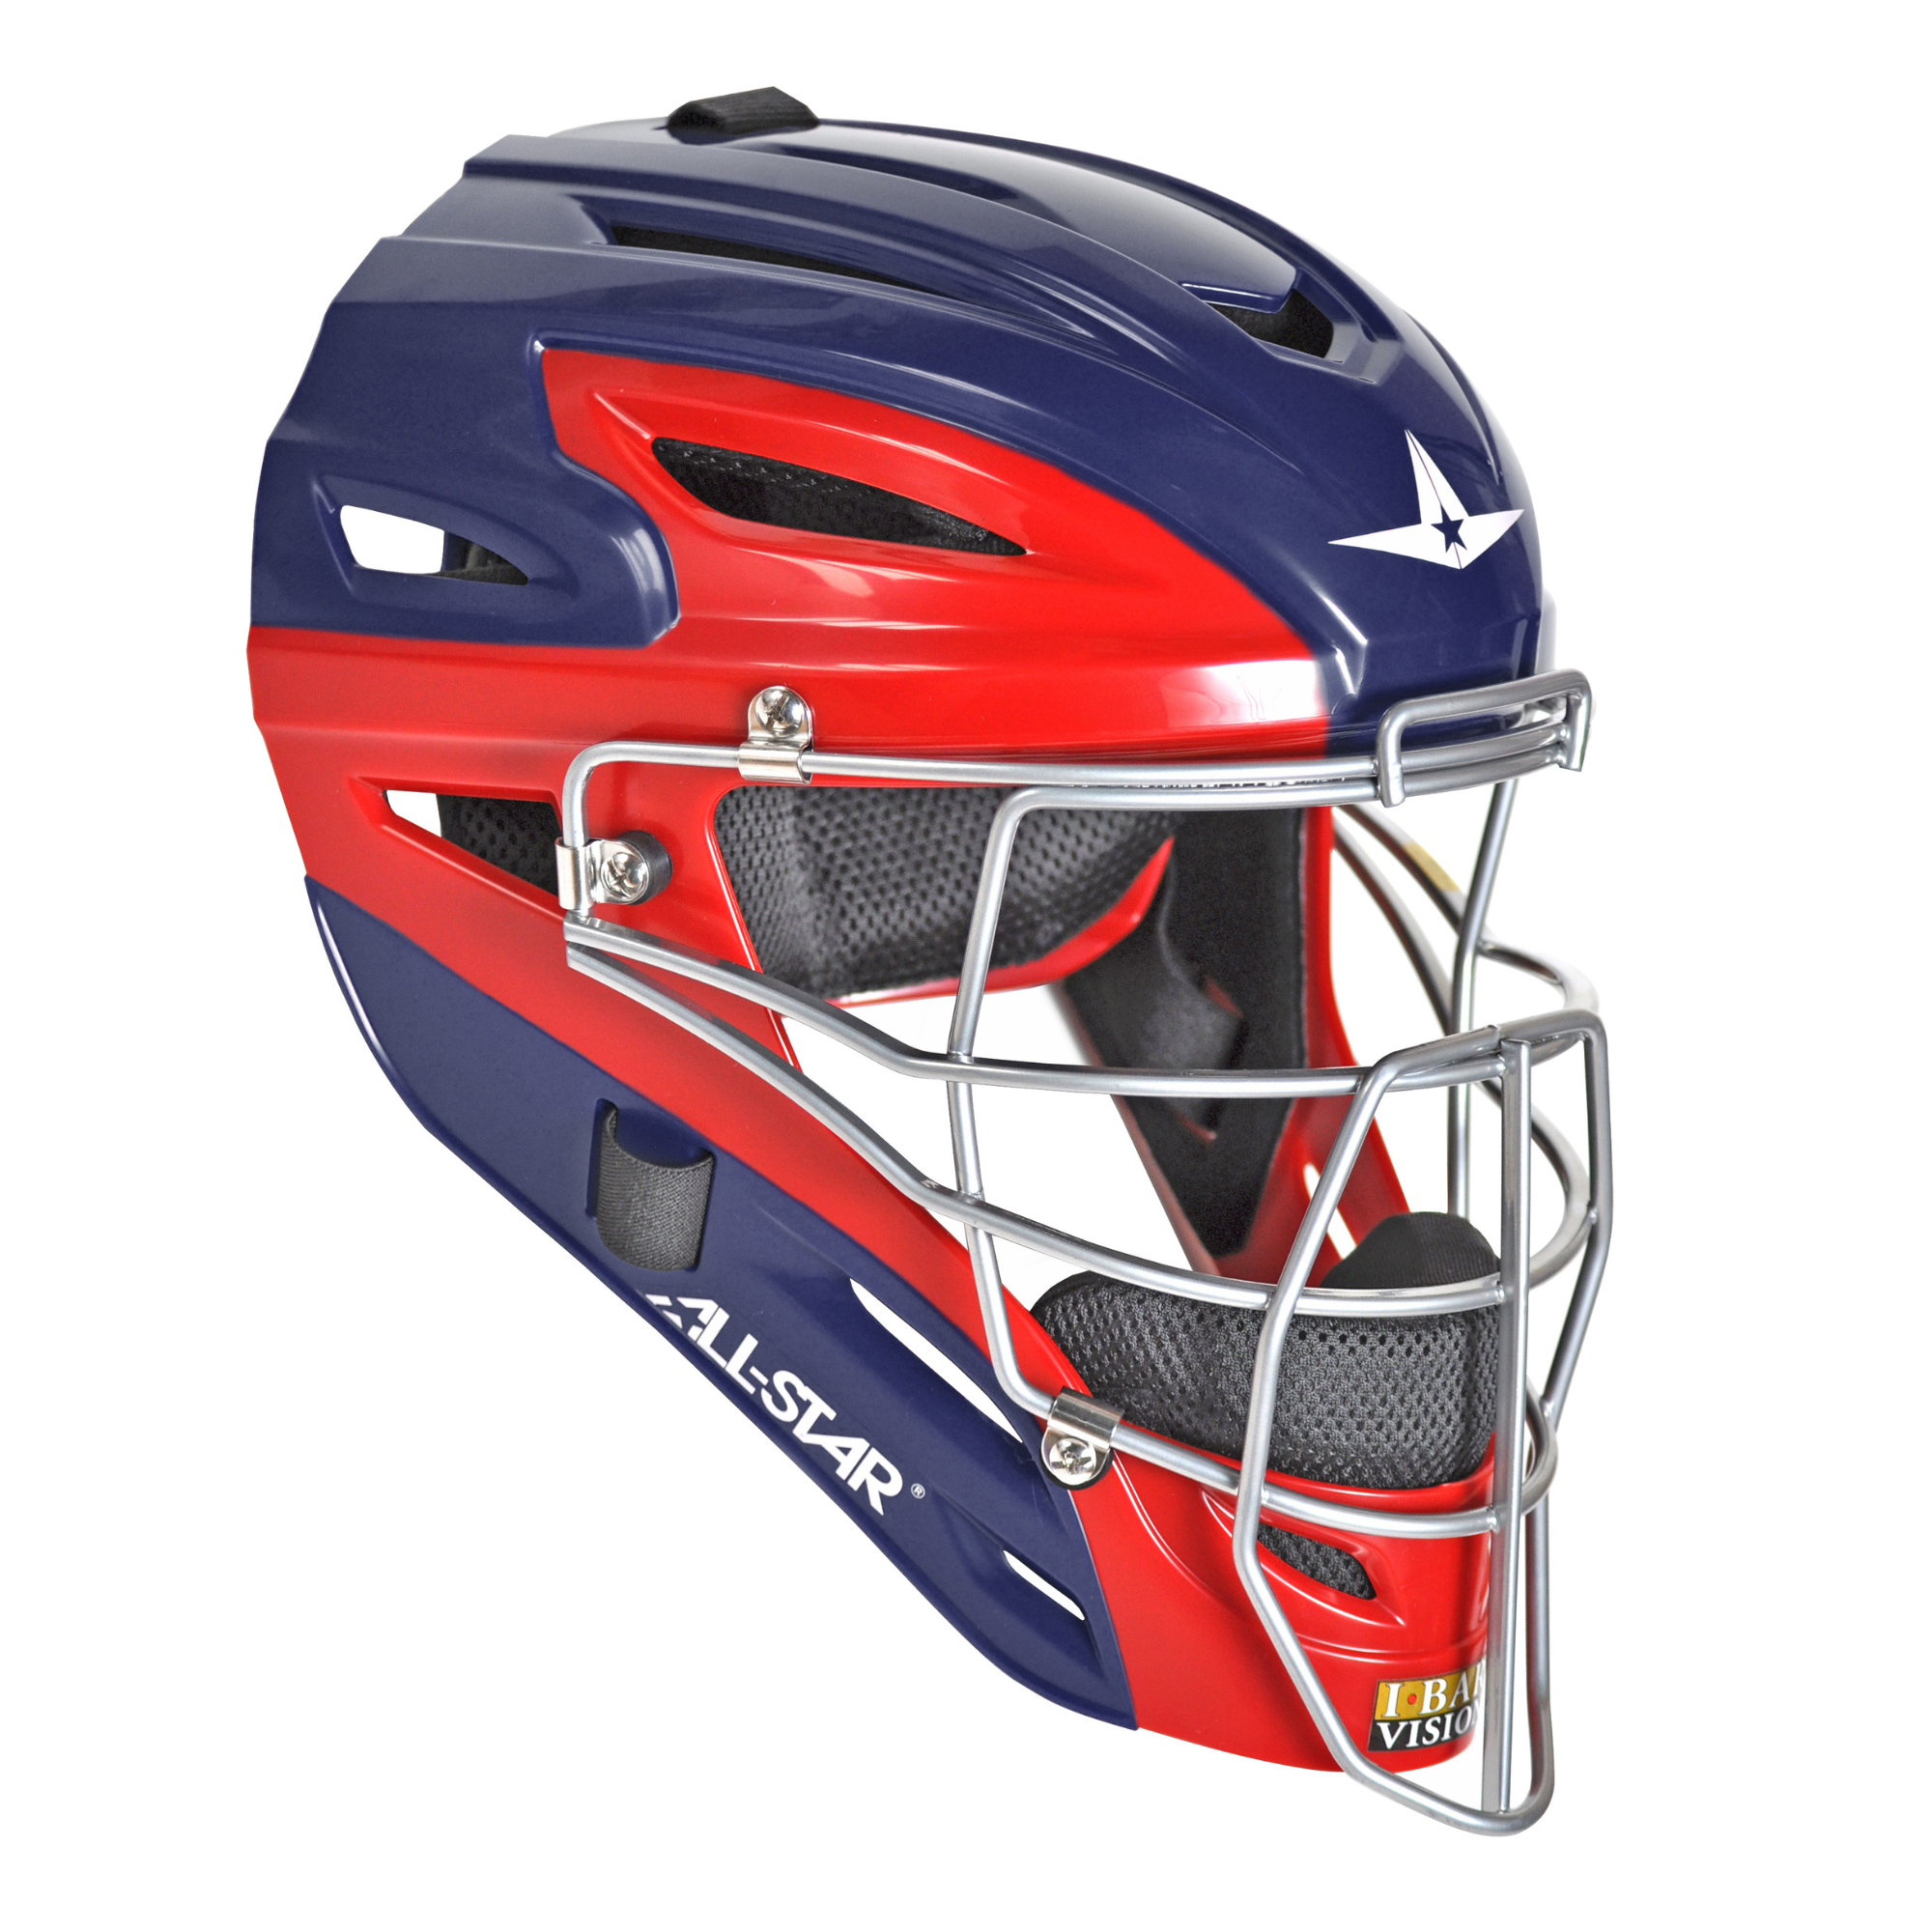 All-Star S7 Helmet / Meets NOCSAE / Two Tone / Adult